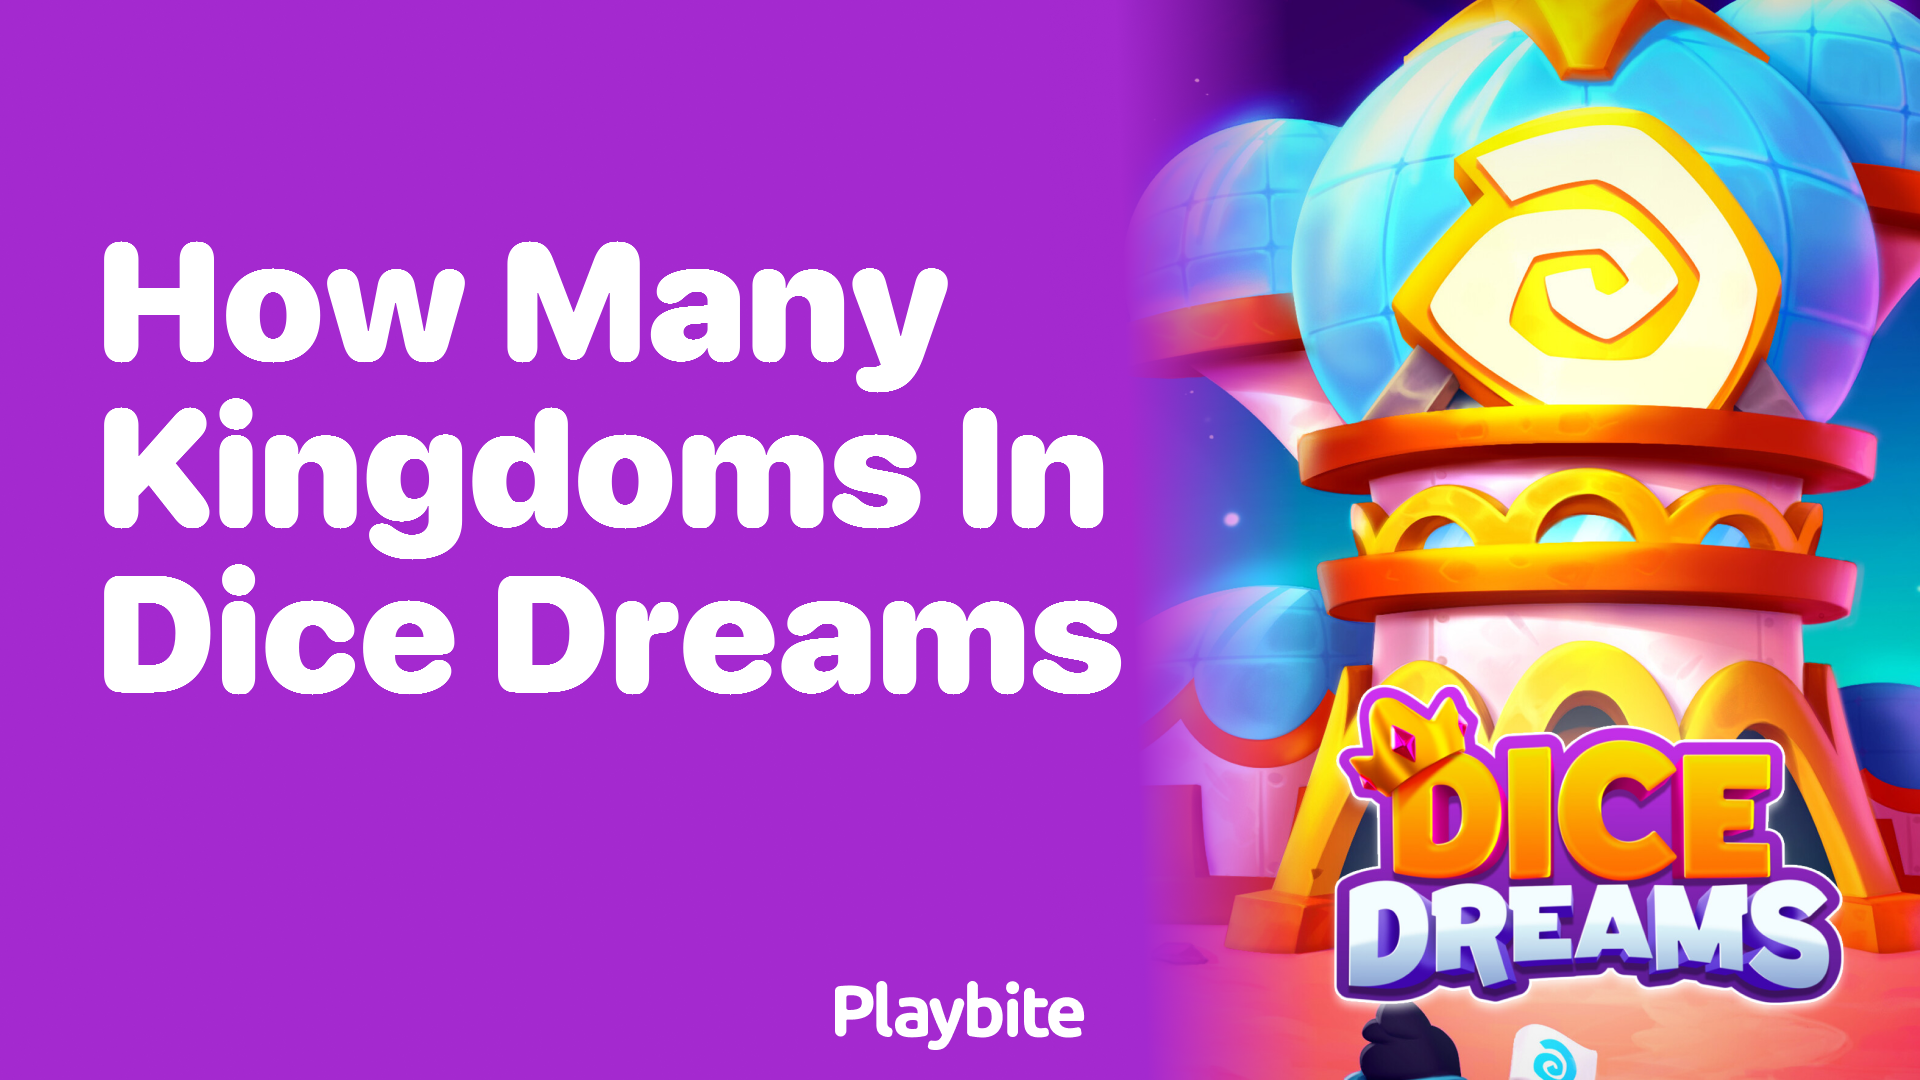 How Many Kingdoms Can You Explore in Dice Dreams?